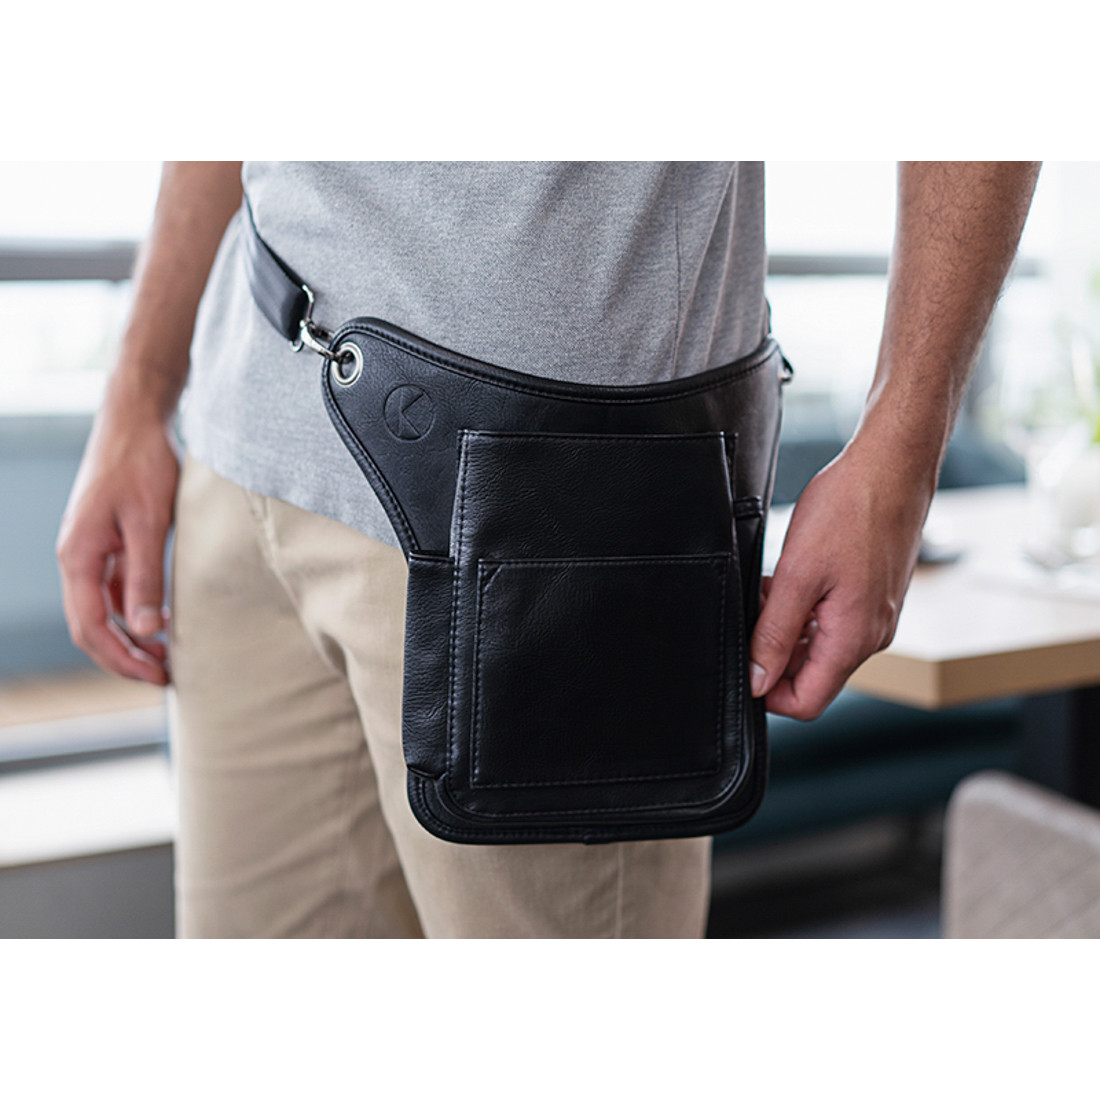 High-Capacity Waiters' Holster with Integrated Belt Harness - Safetywear